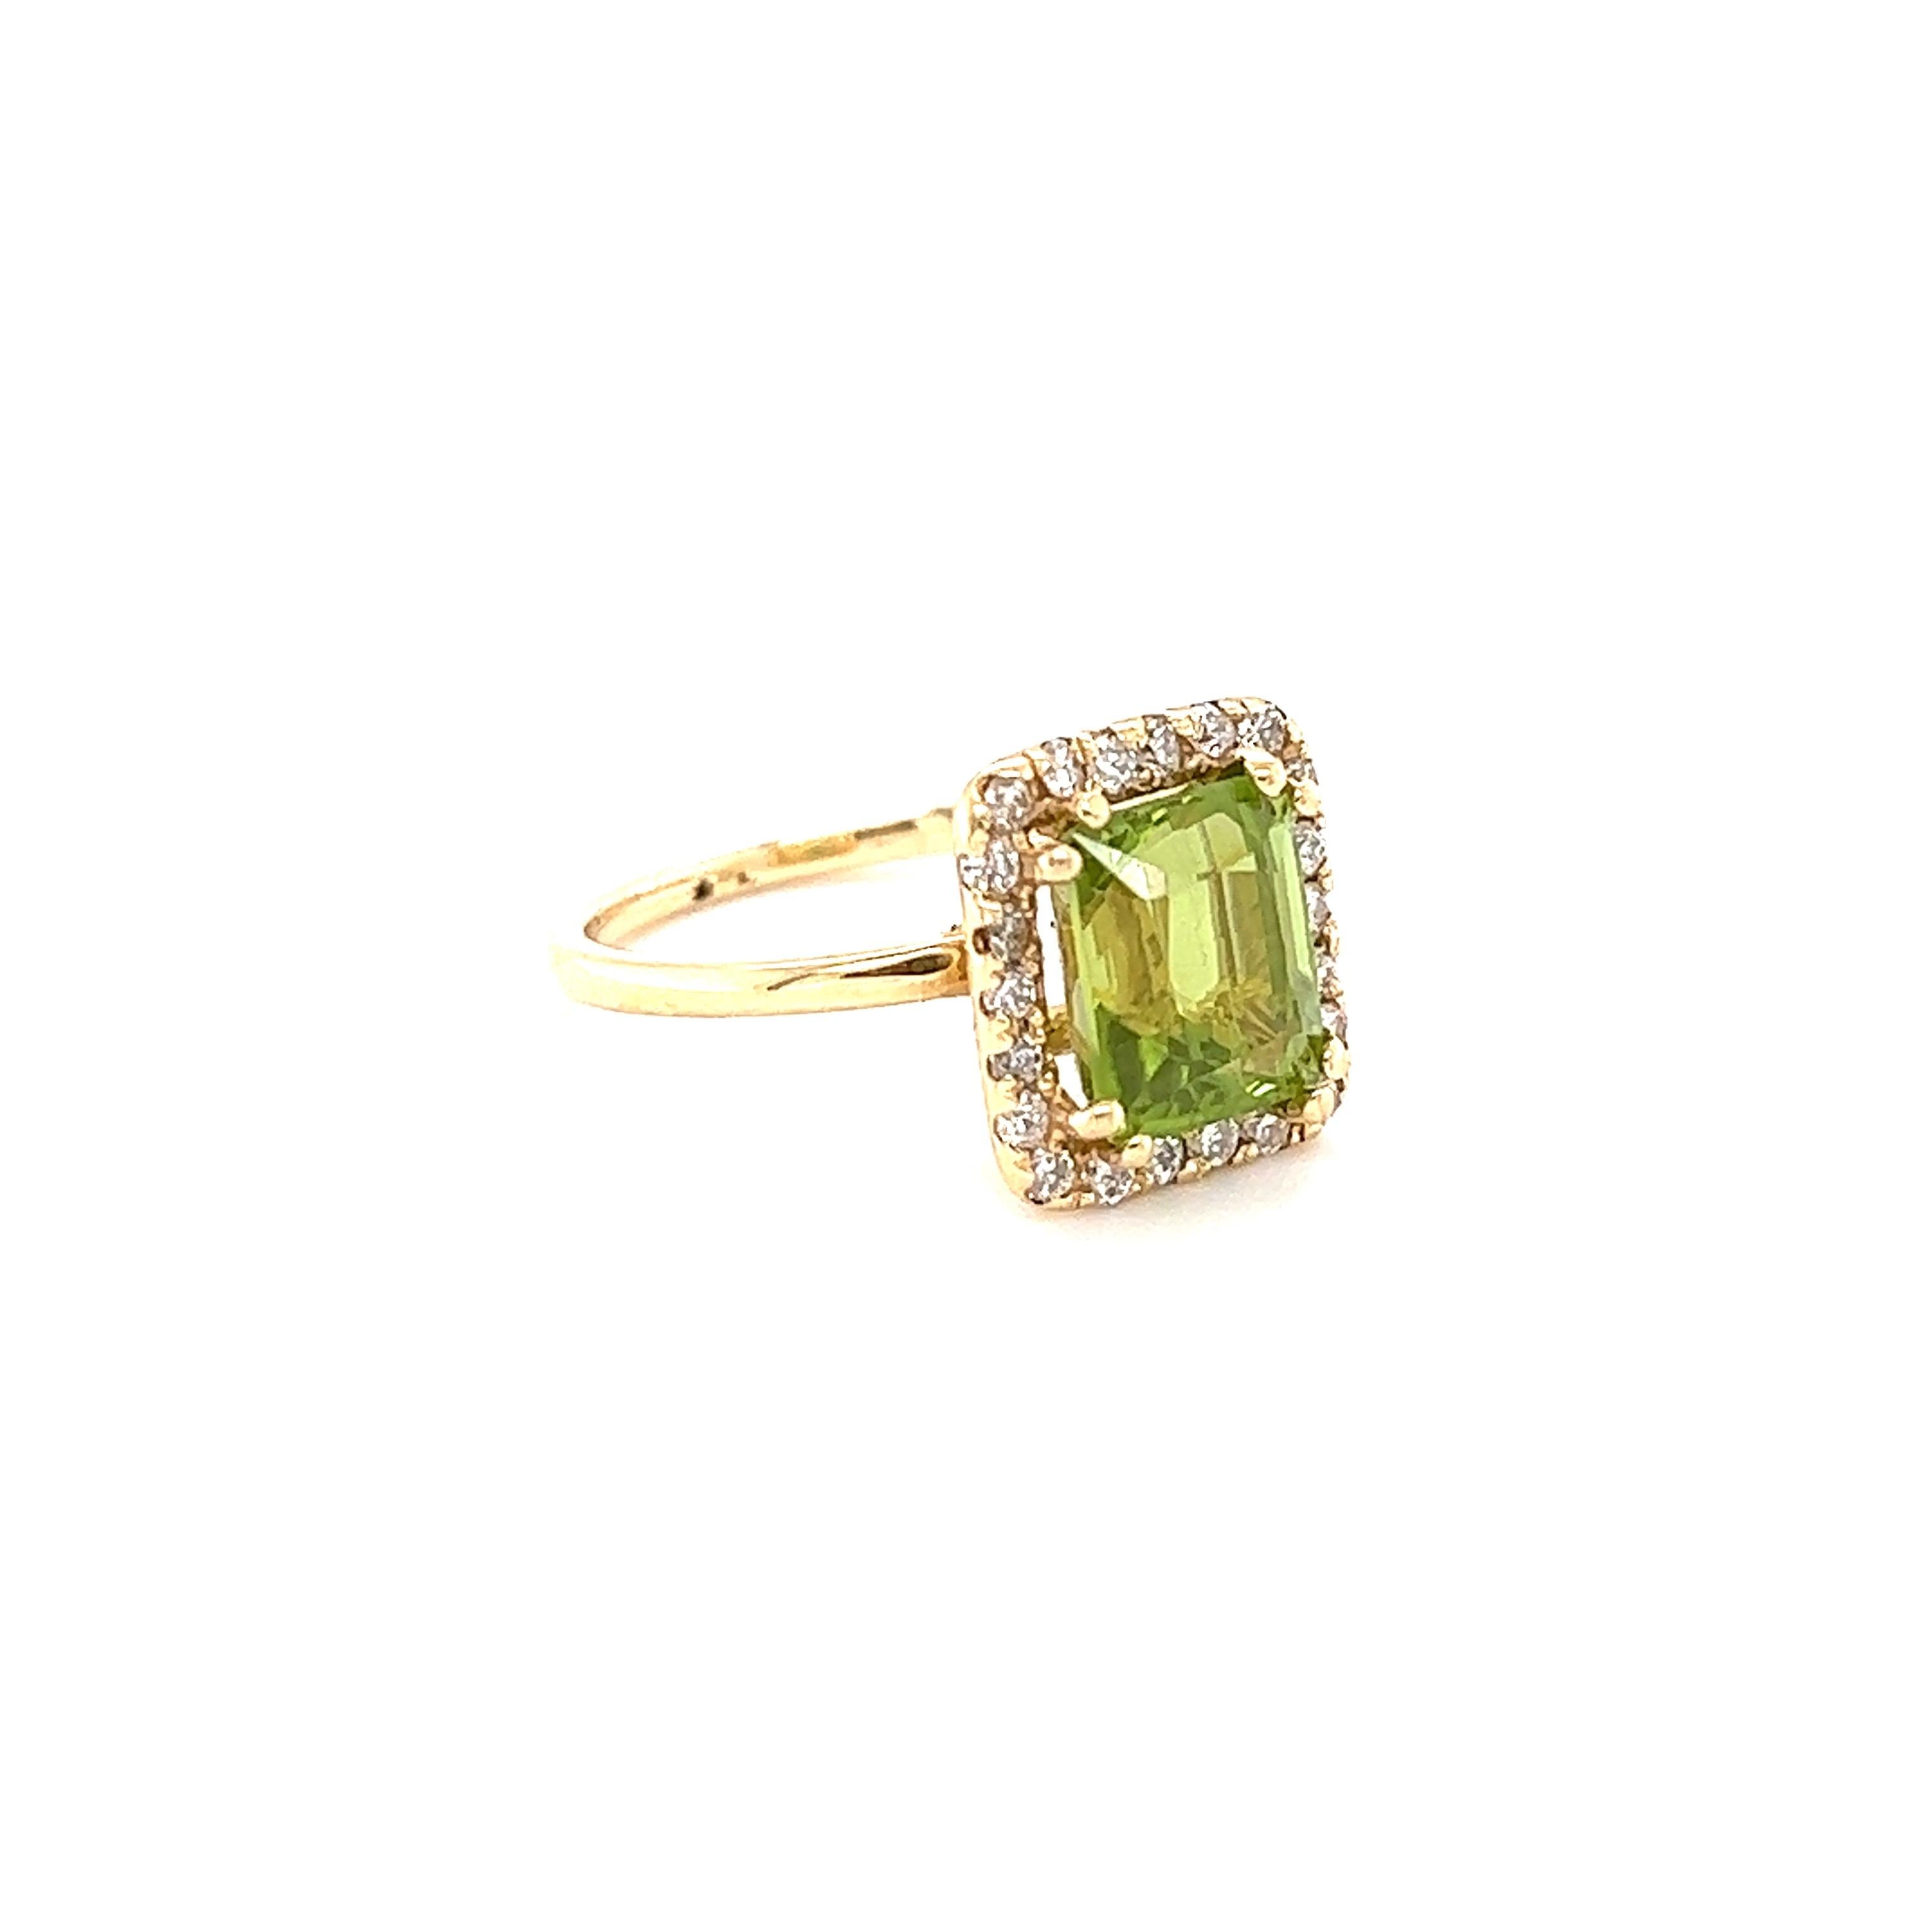 This Peridot and Diamond Ring has a 3.96 Carat Emerald Cut Peridot and has a halo of 22 Round Cut Diamonds weighing 0.41 Carats. The total carat weight of the ring is 4.37 Carats. 

It is set in 14 Karat Yellow Gold and weighs approximate 3.8 grams.